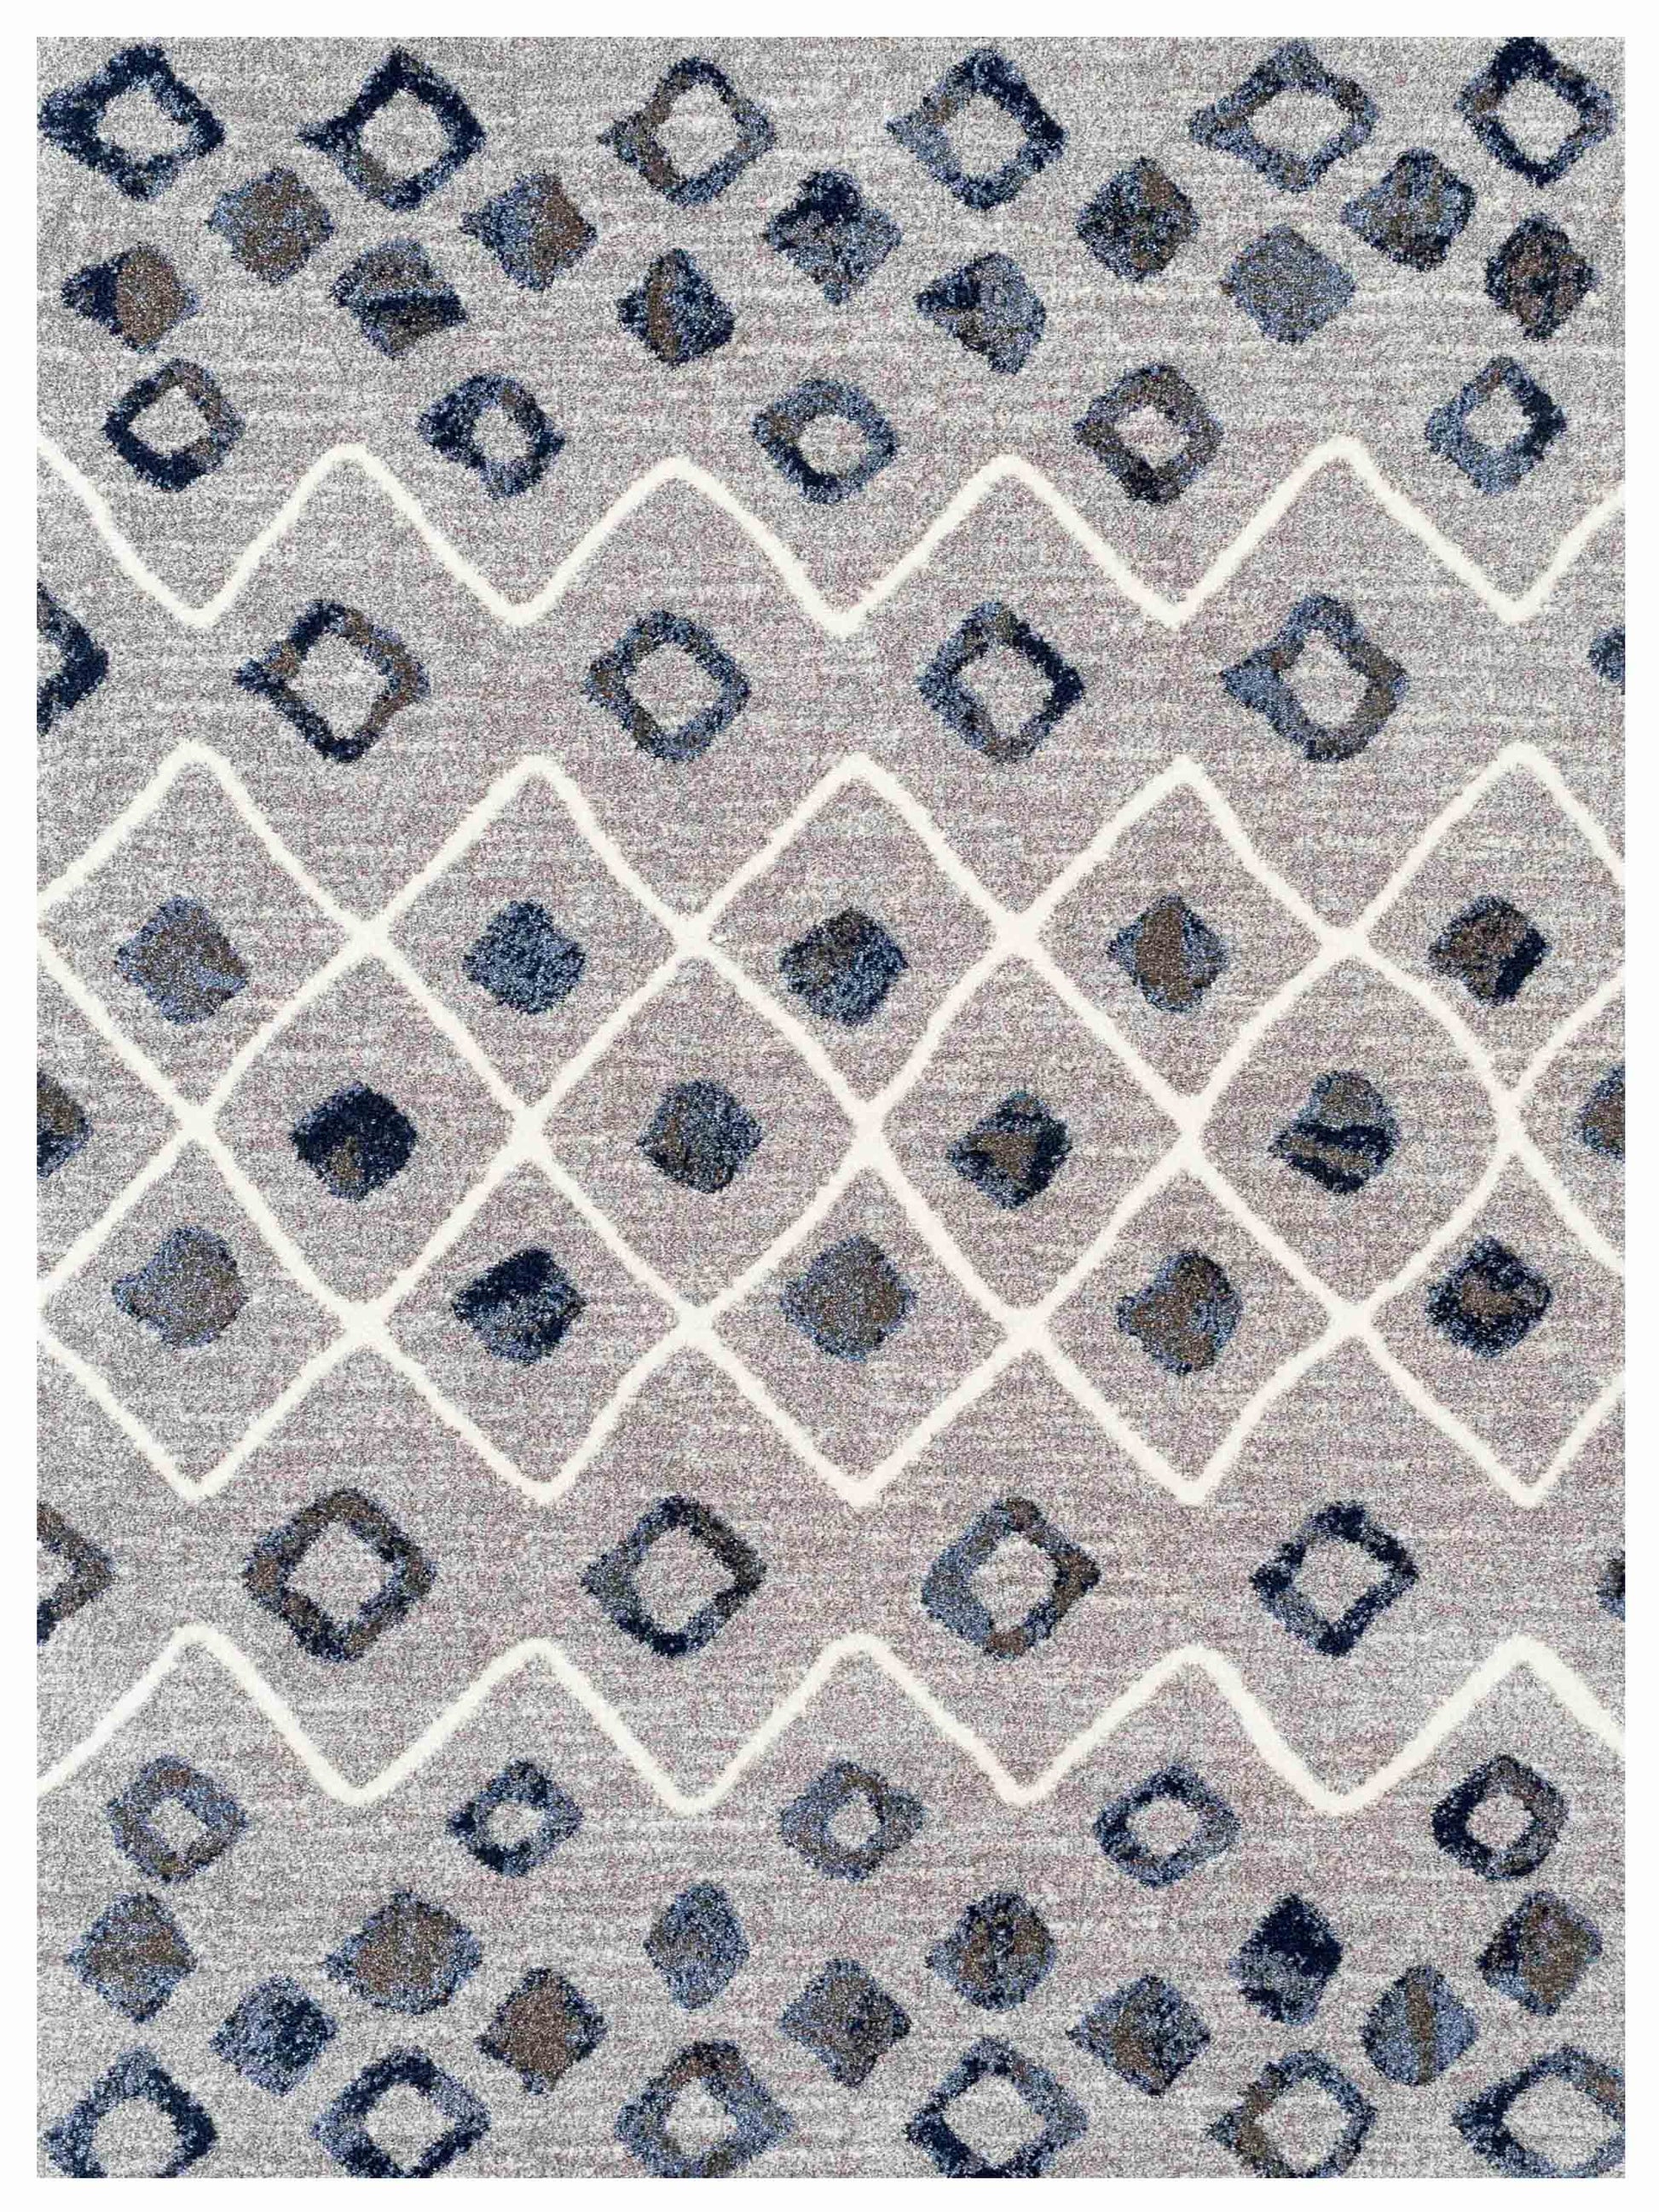 Limited Selena SD-605 Steel Blue Transitional Machinemade Rug